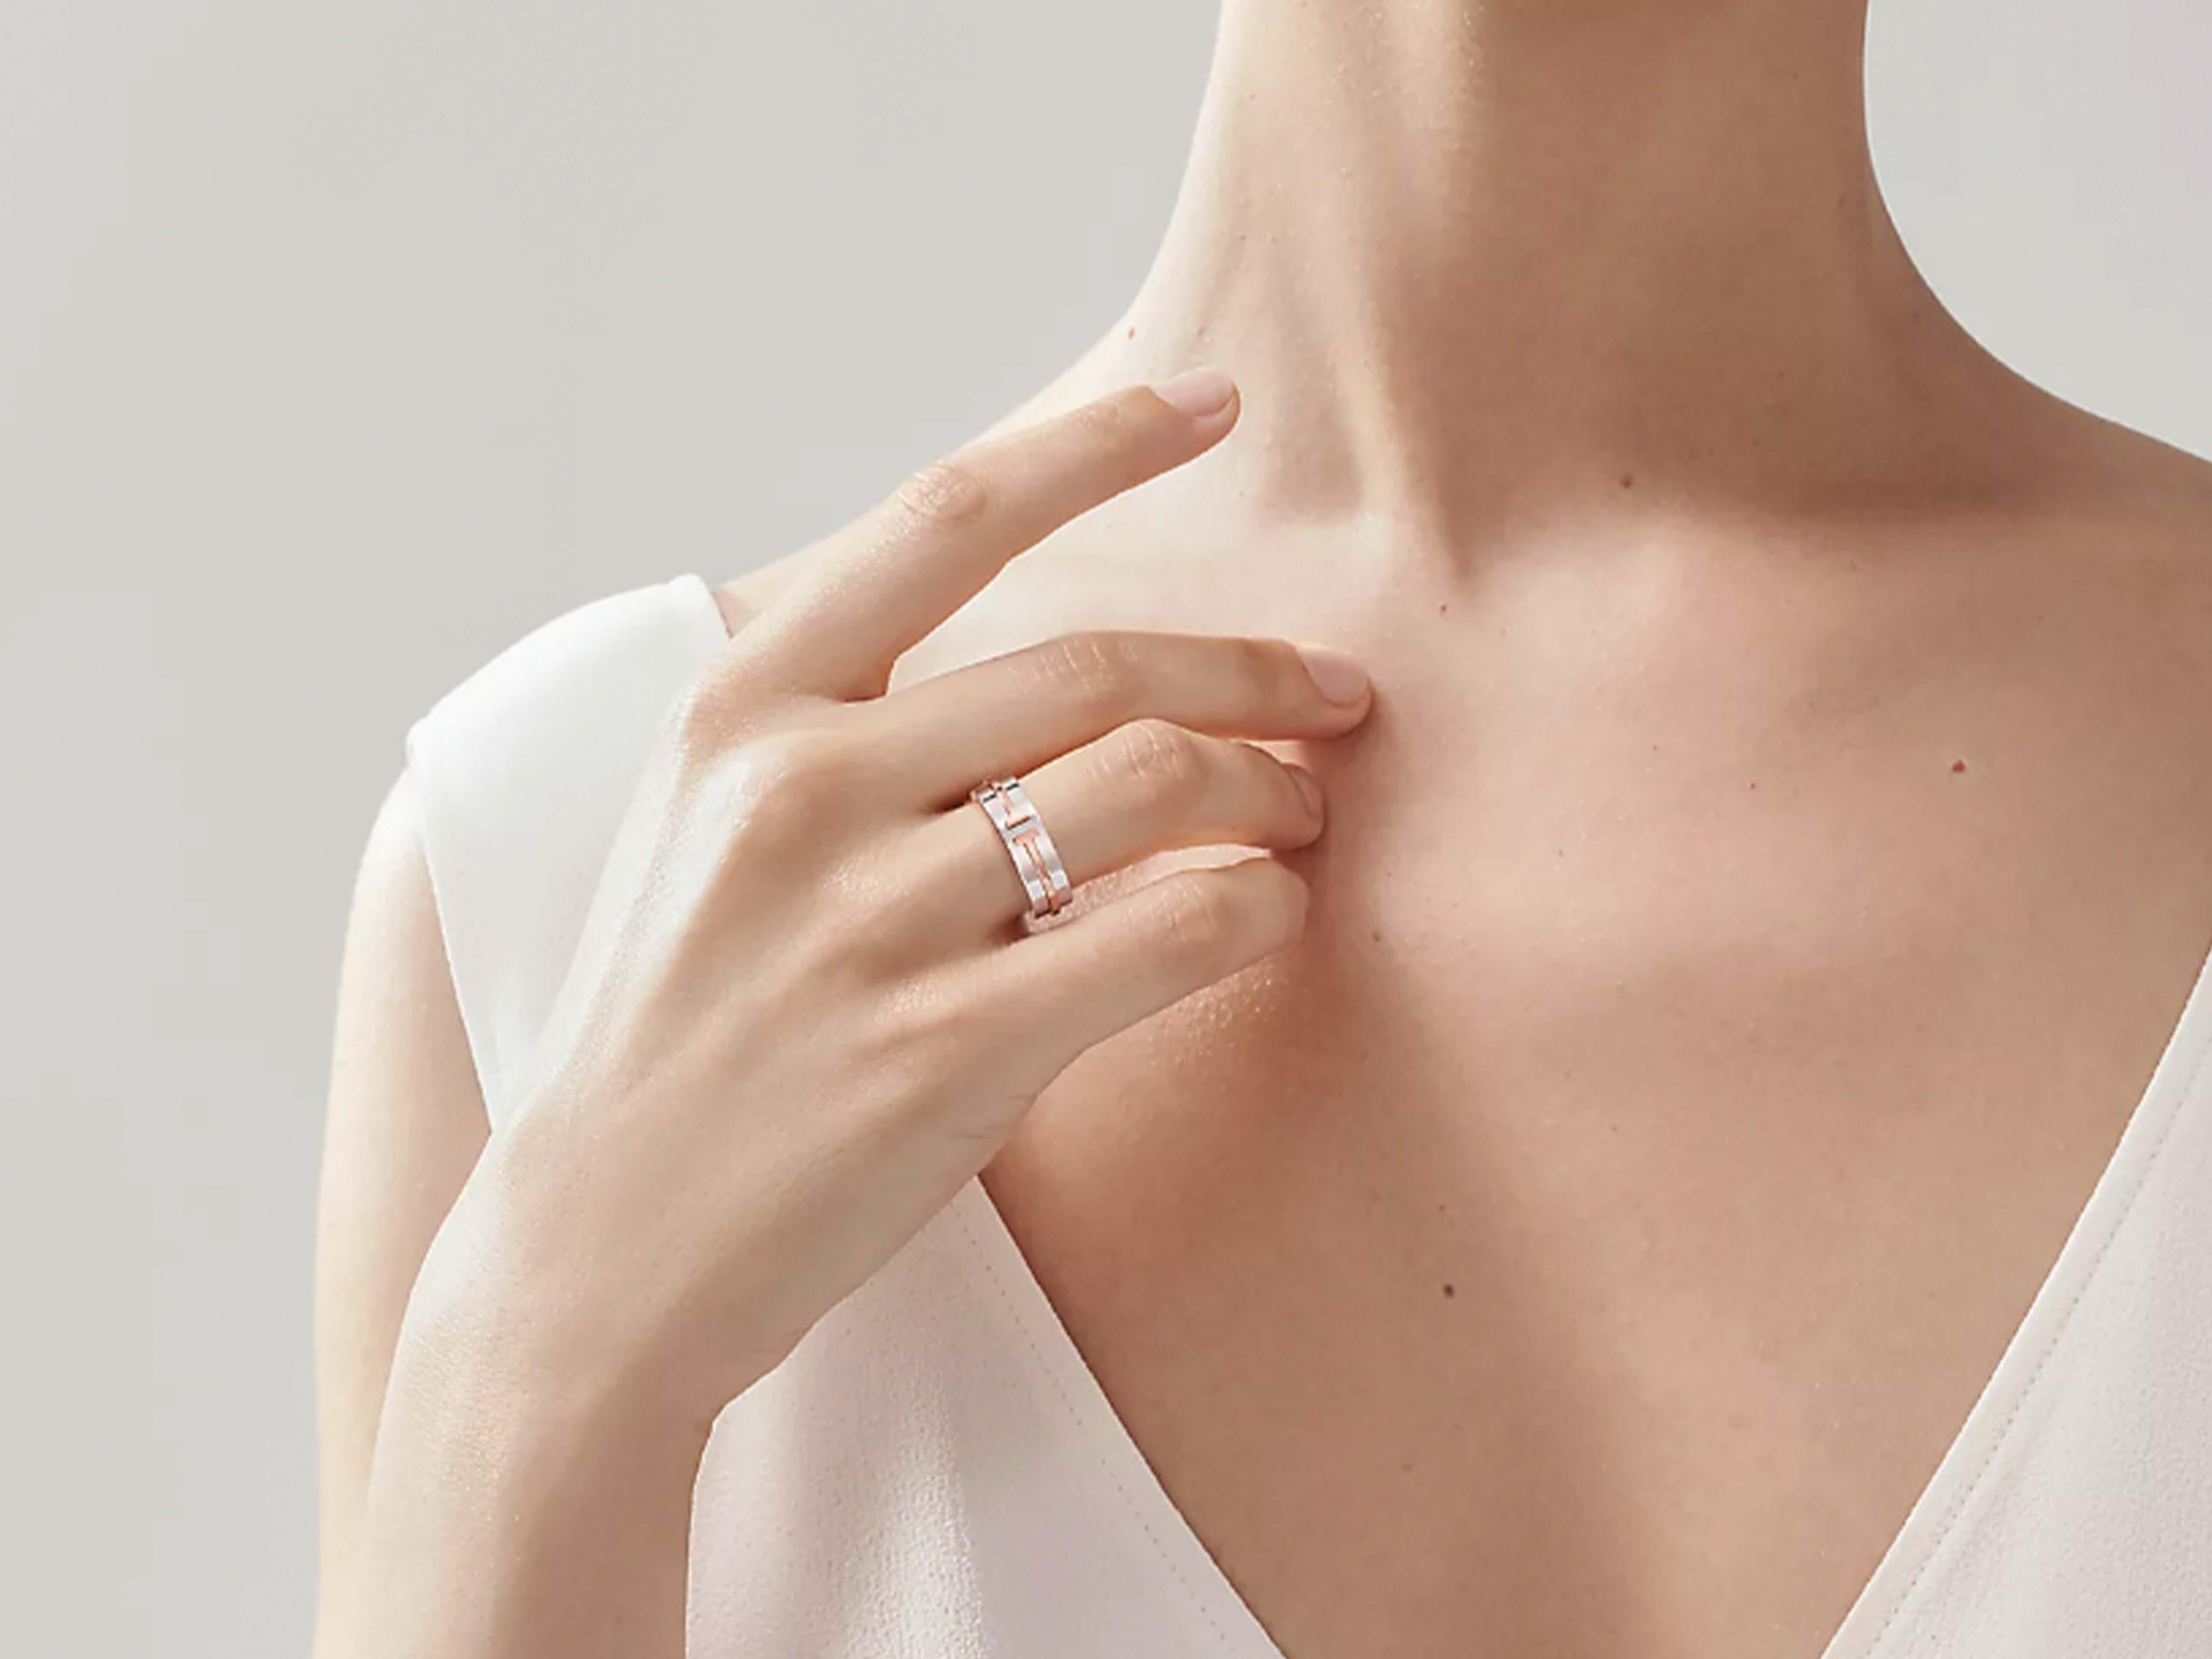 Authentic Tiffany T Wide Band Ring in Sterling Silver and 18k Rose Gold. The bold lines of this timeless design highlight the powerful form of the letter 